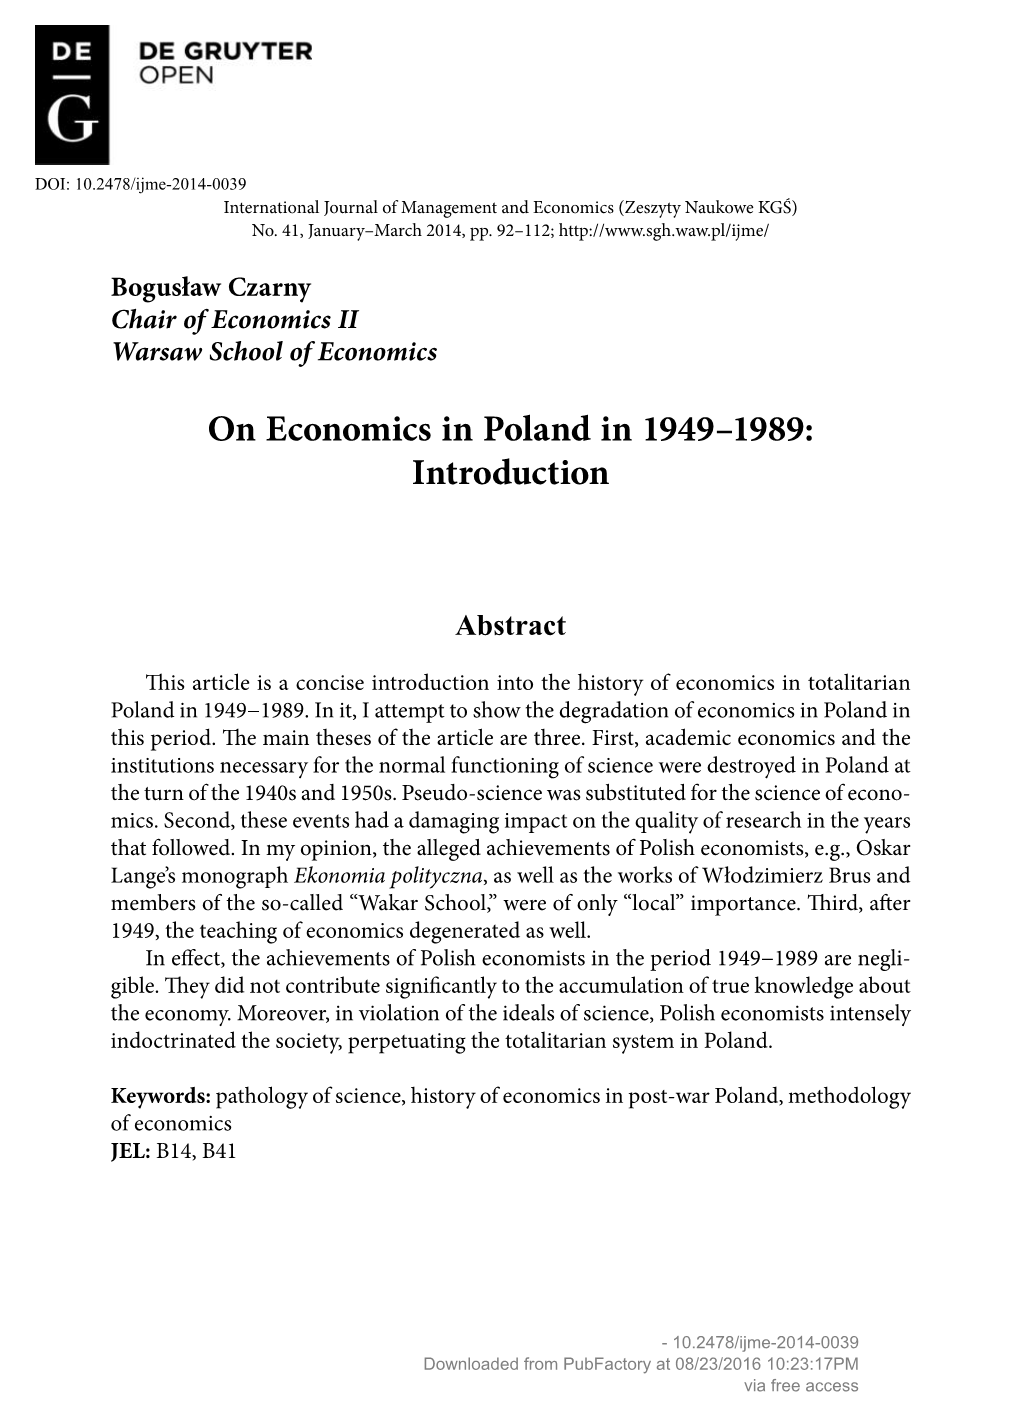 On Economics in Poland in 1949–1989: Introduction